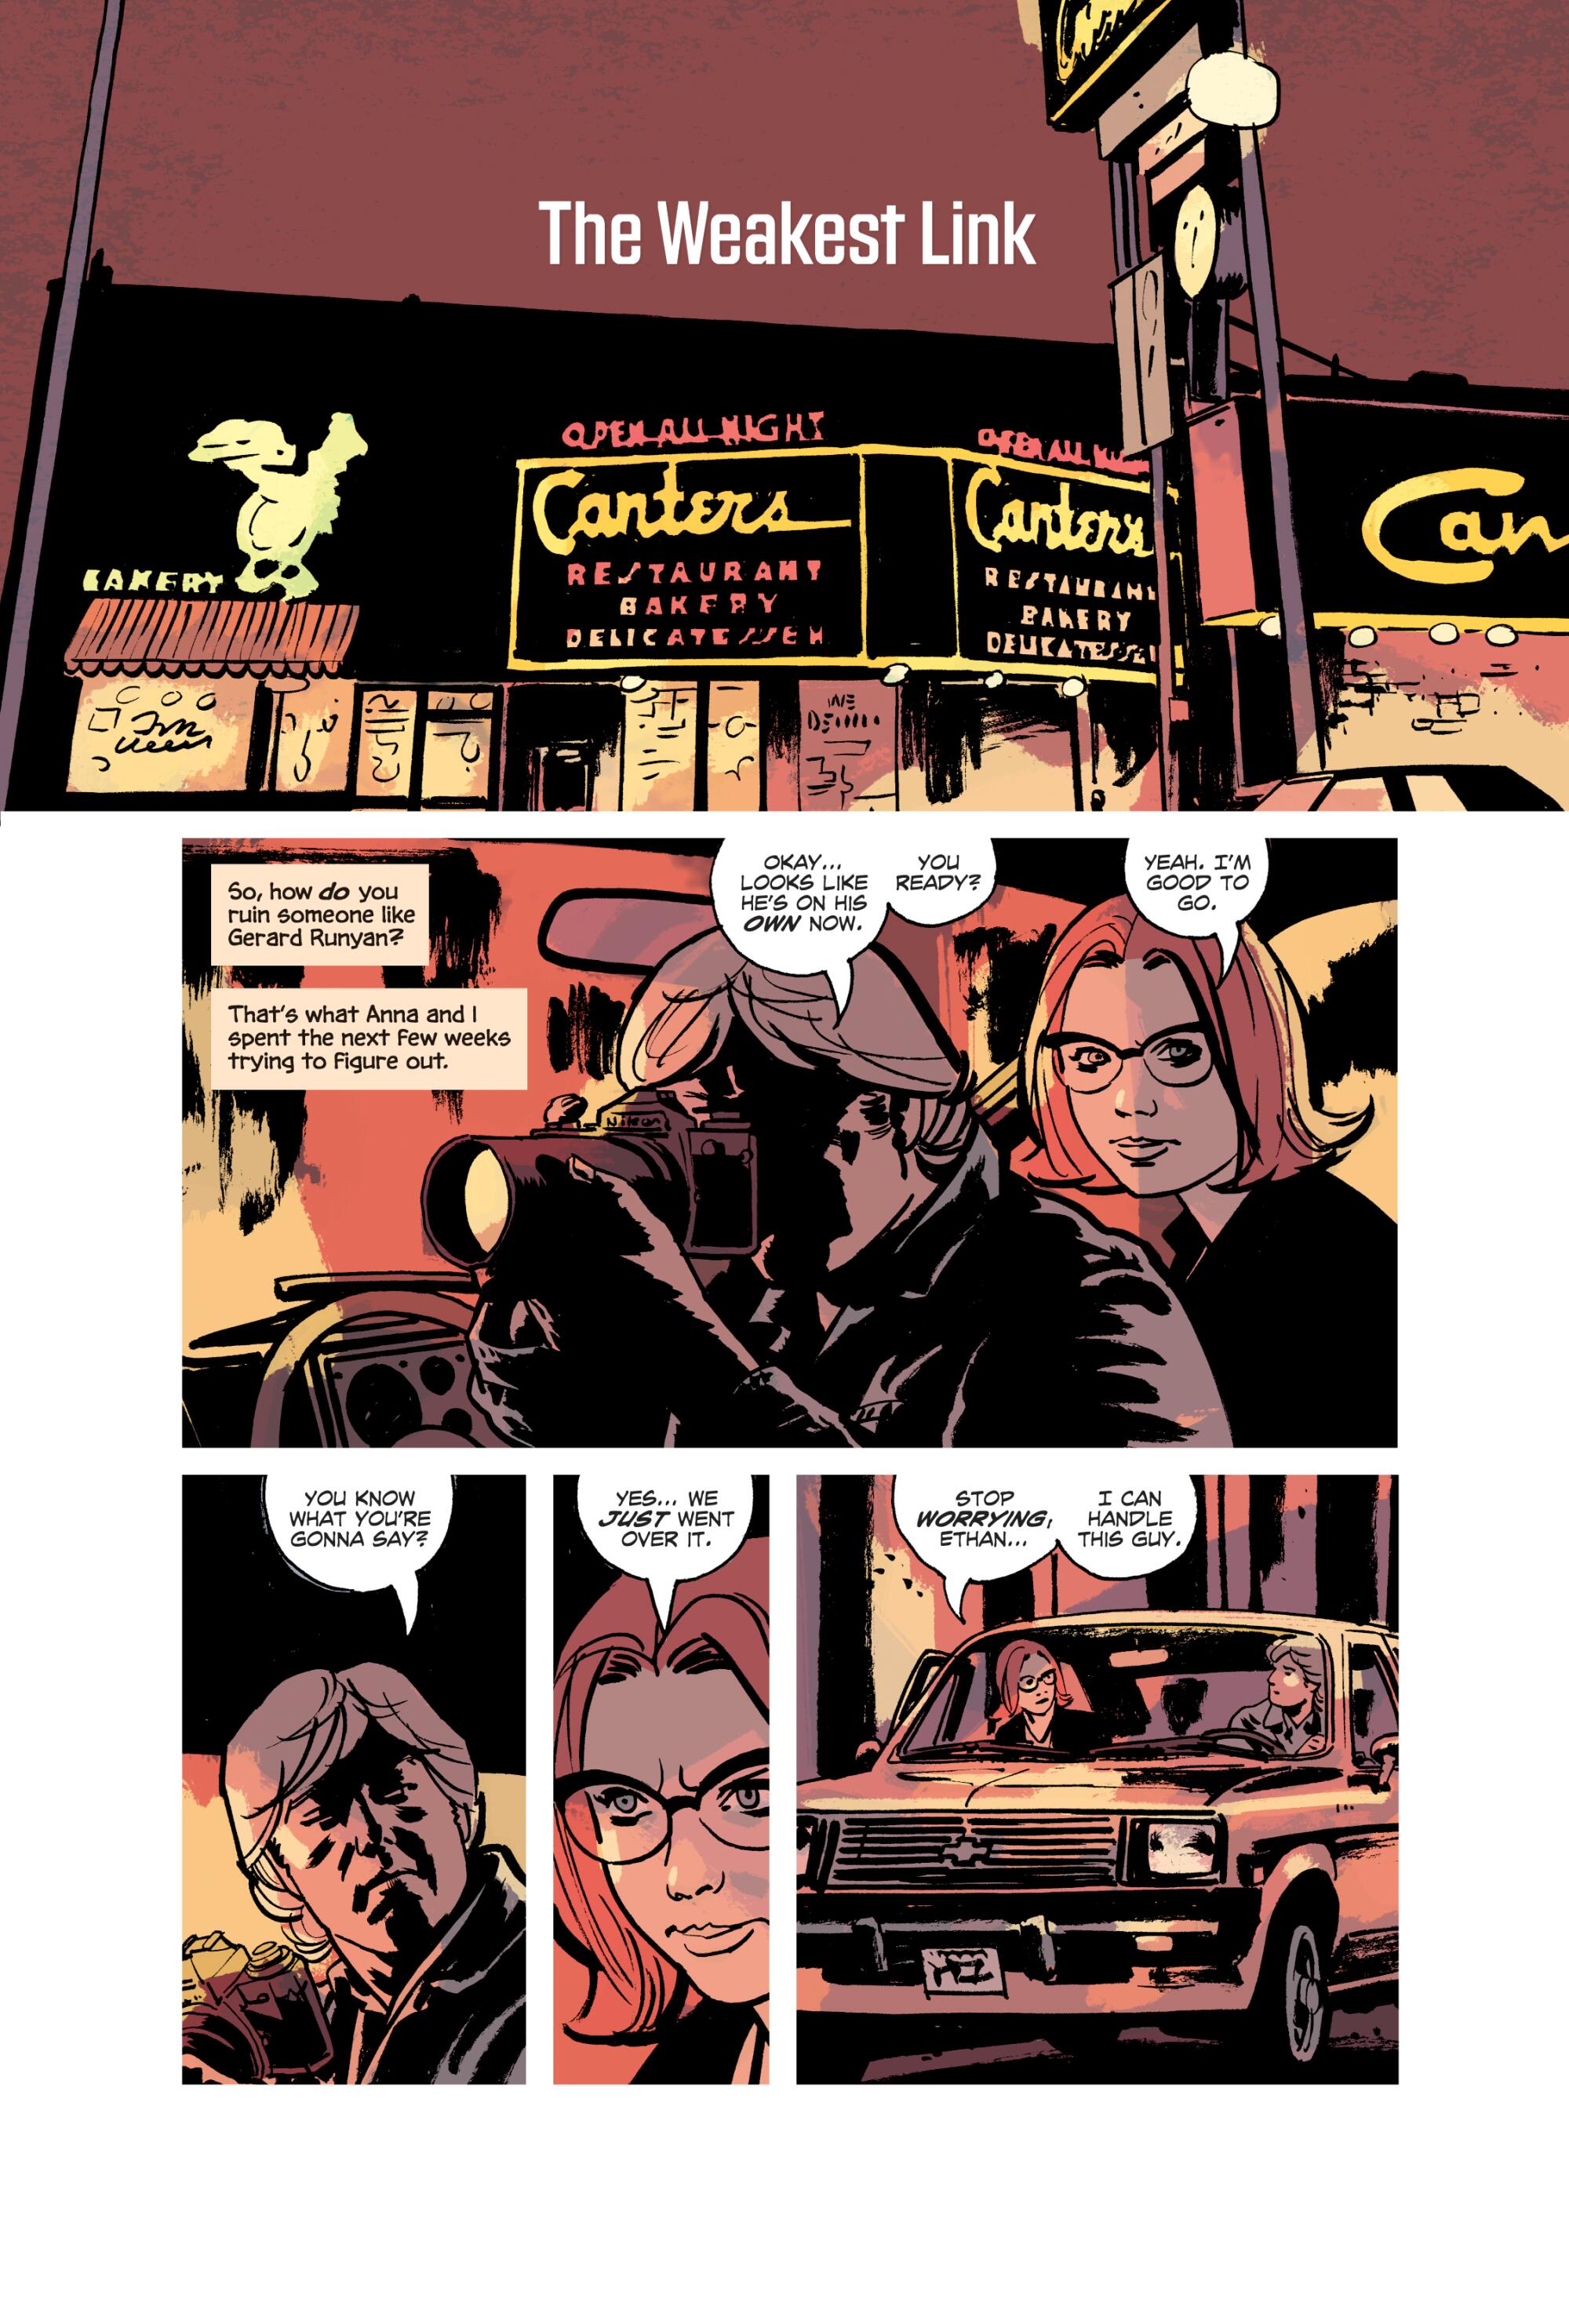 A page from "The Ghost in You" by Ed Brubaker and Sean Phillips